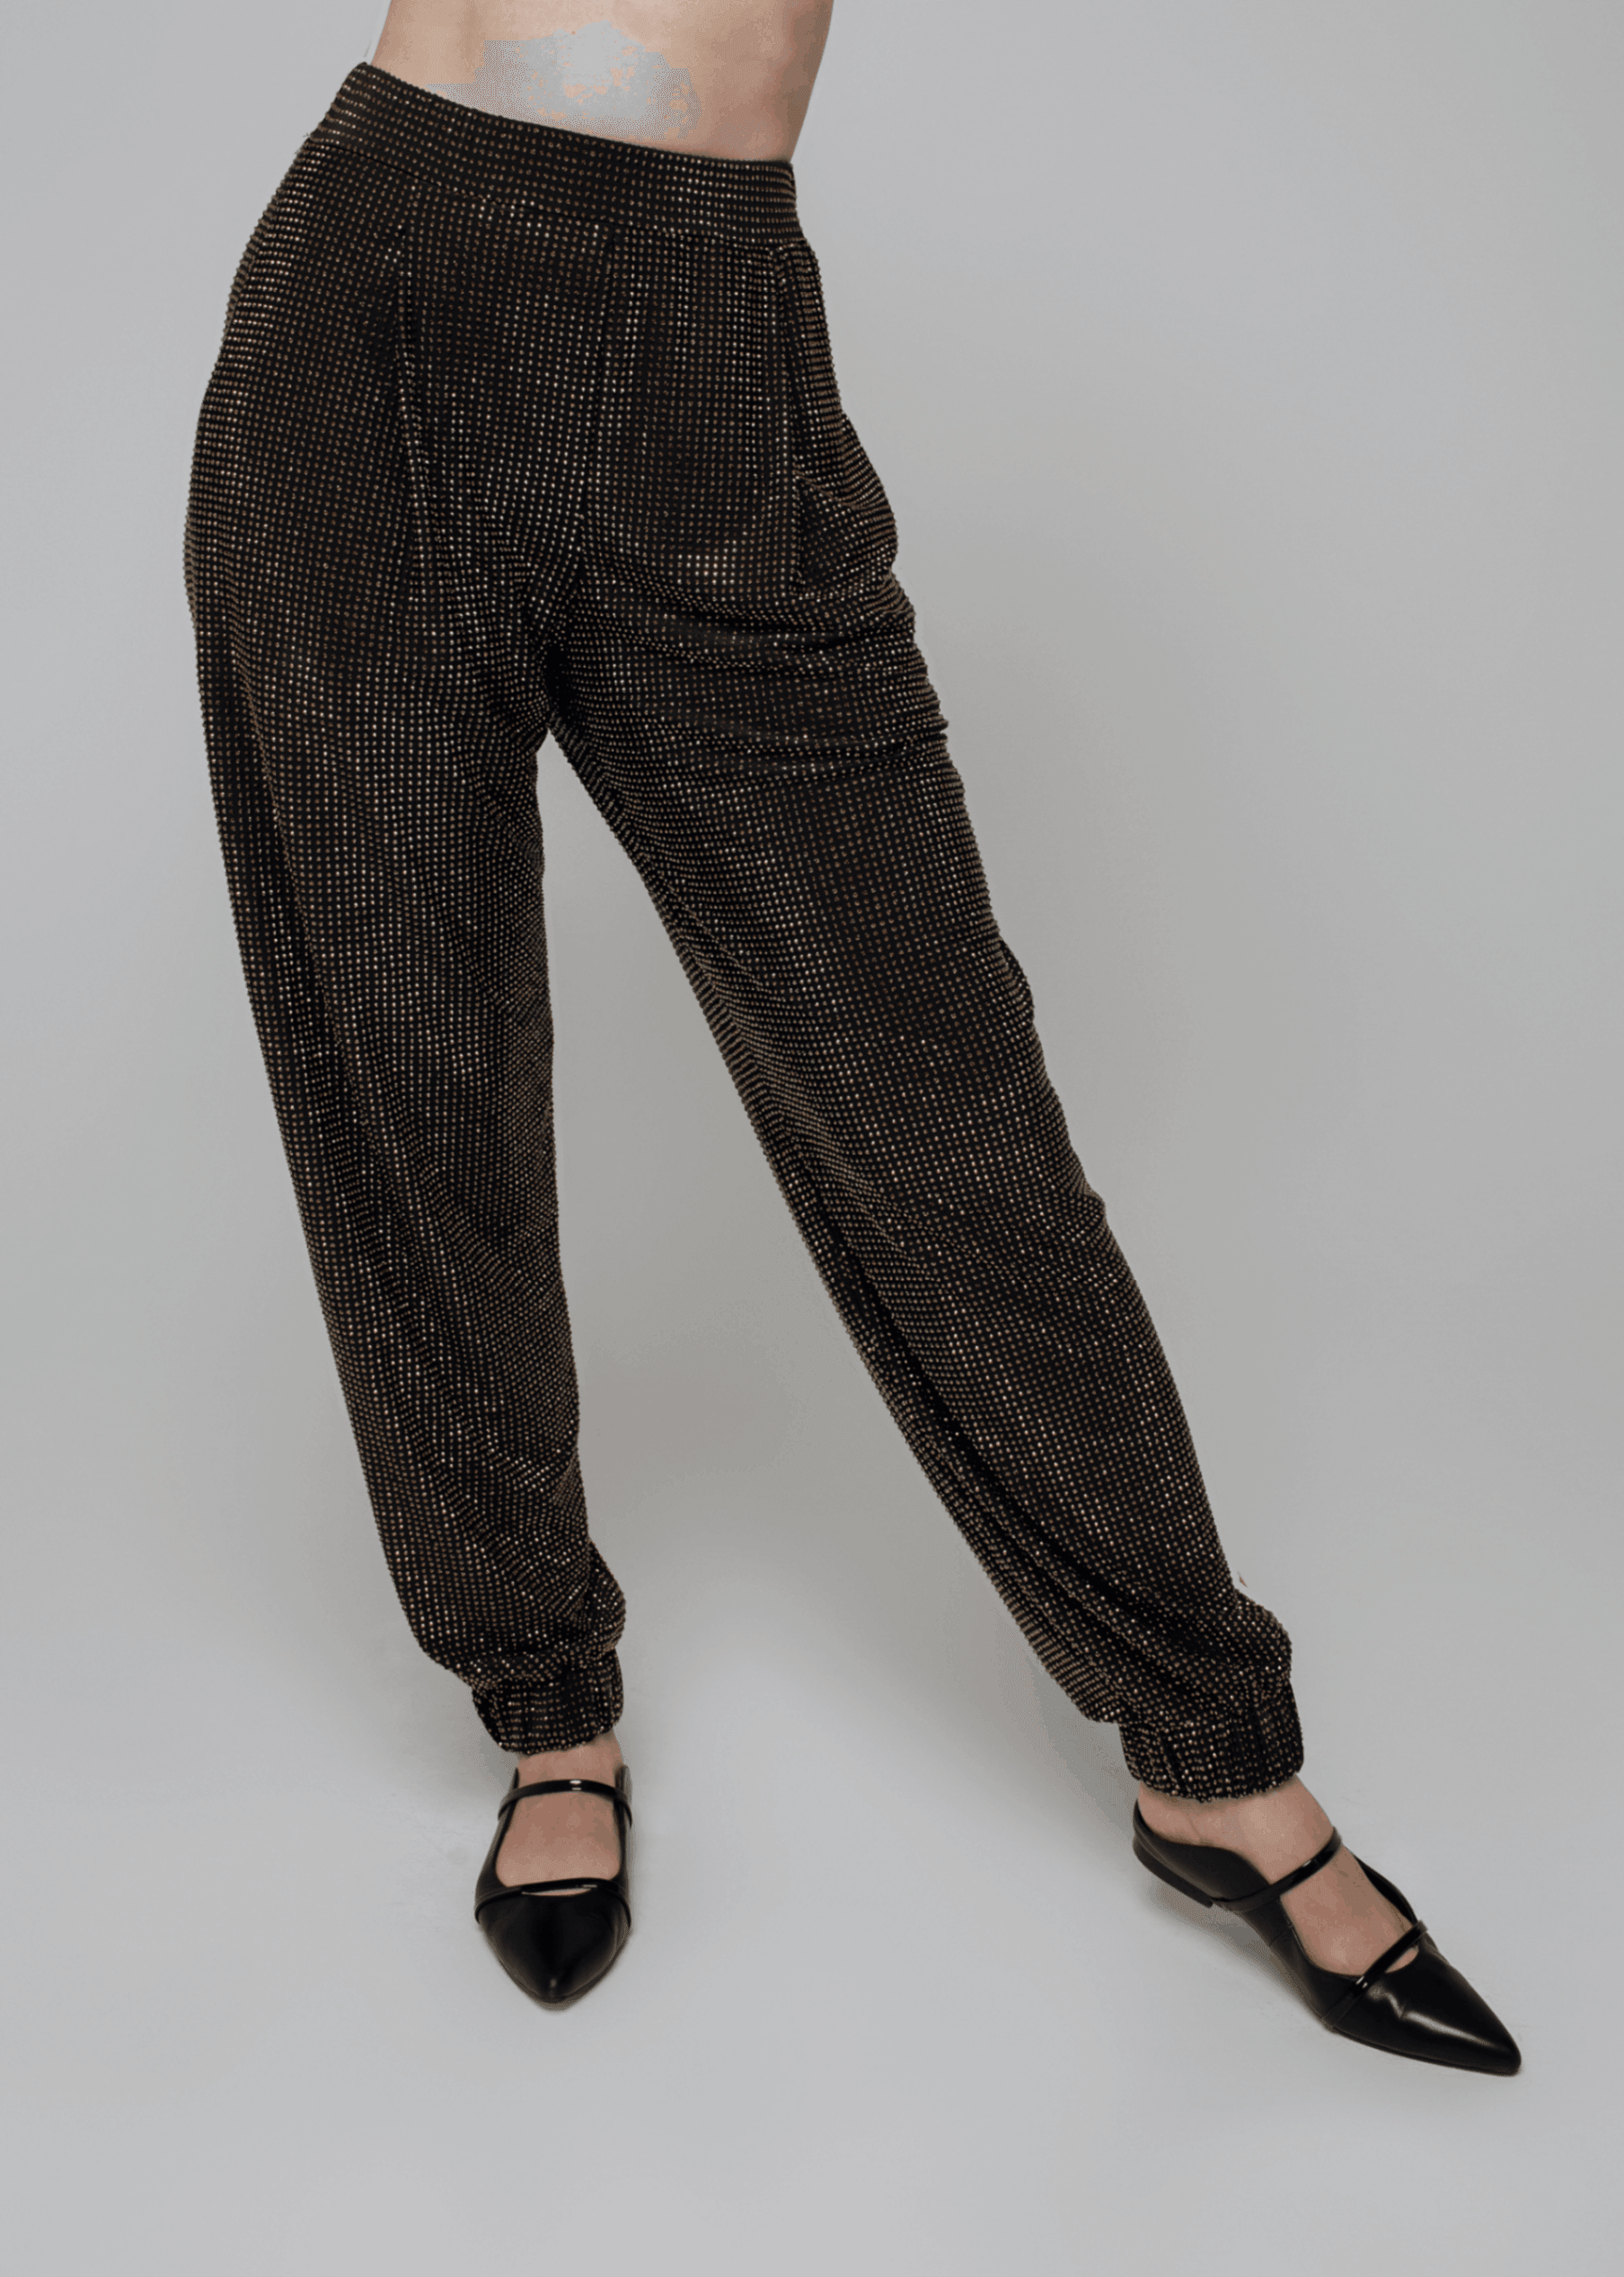 Exquisite detail of Axinia Crystal Harem Pants showcasing the fine craftsmanship and elegant design characteristic of Axinia Collection 's luxury collection.